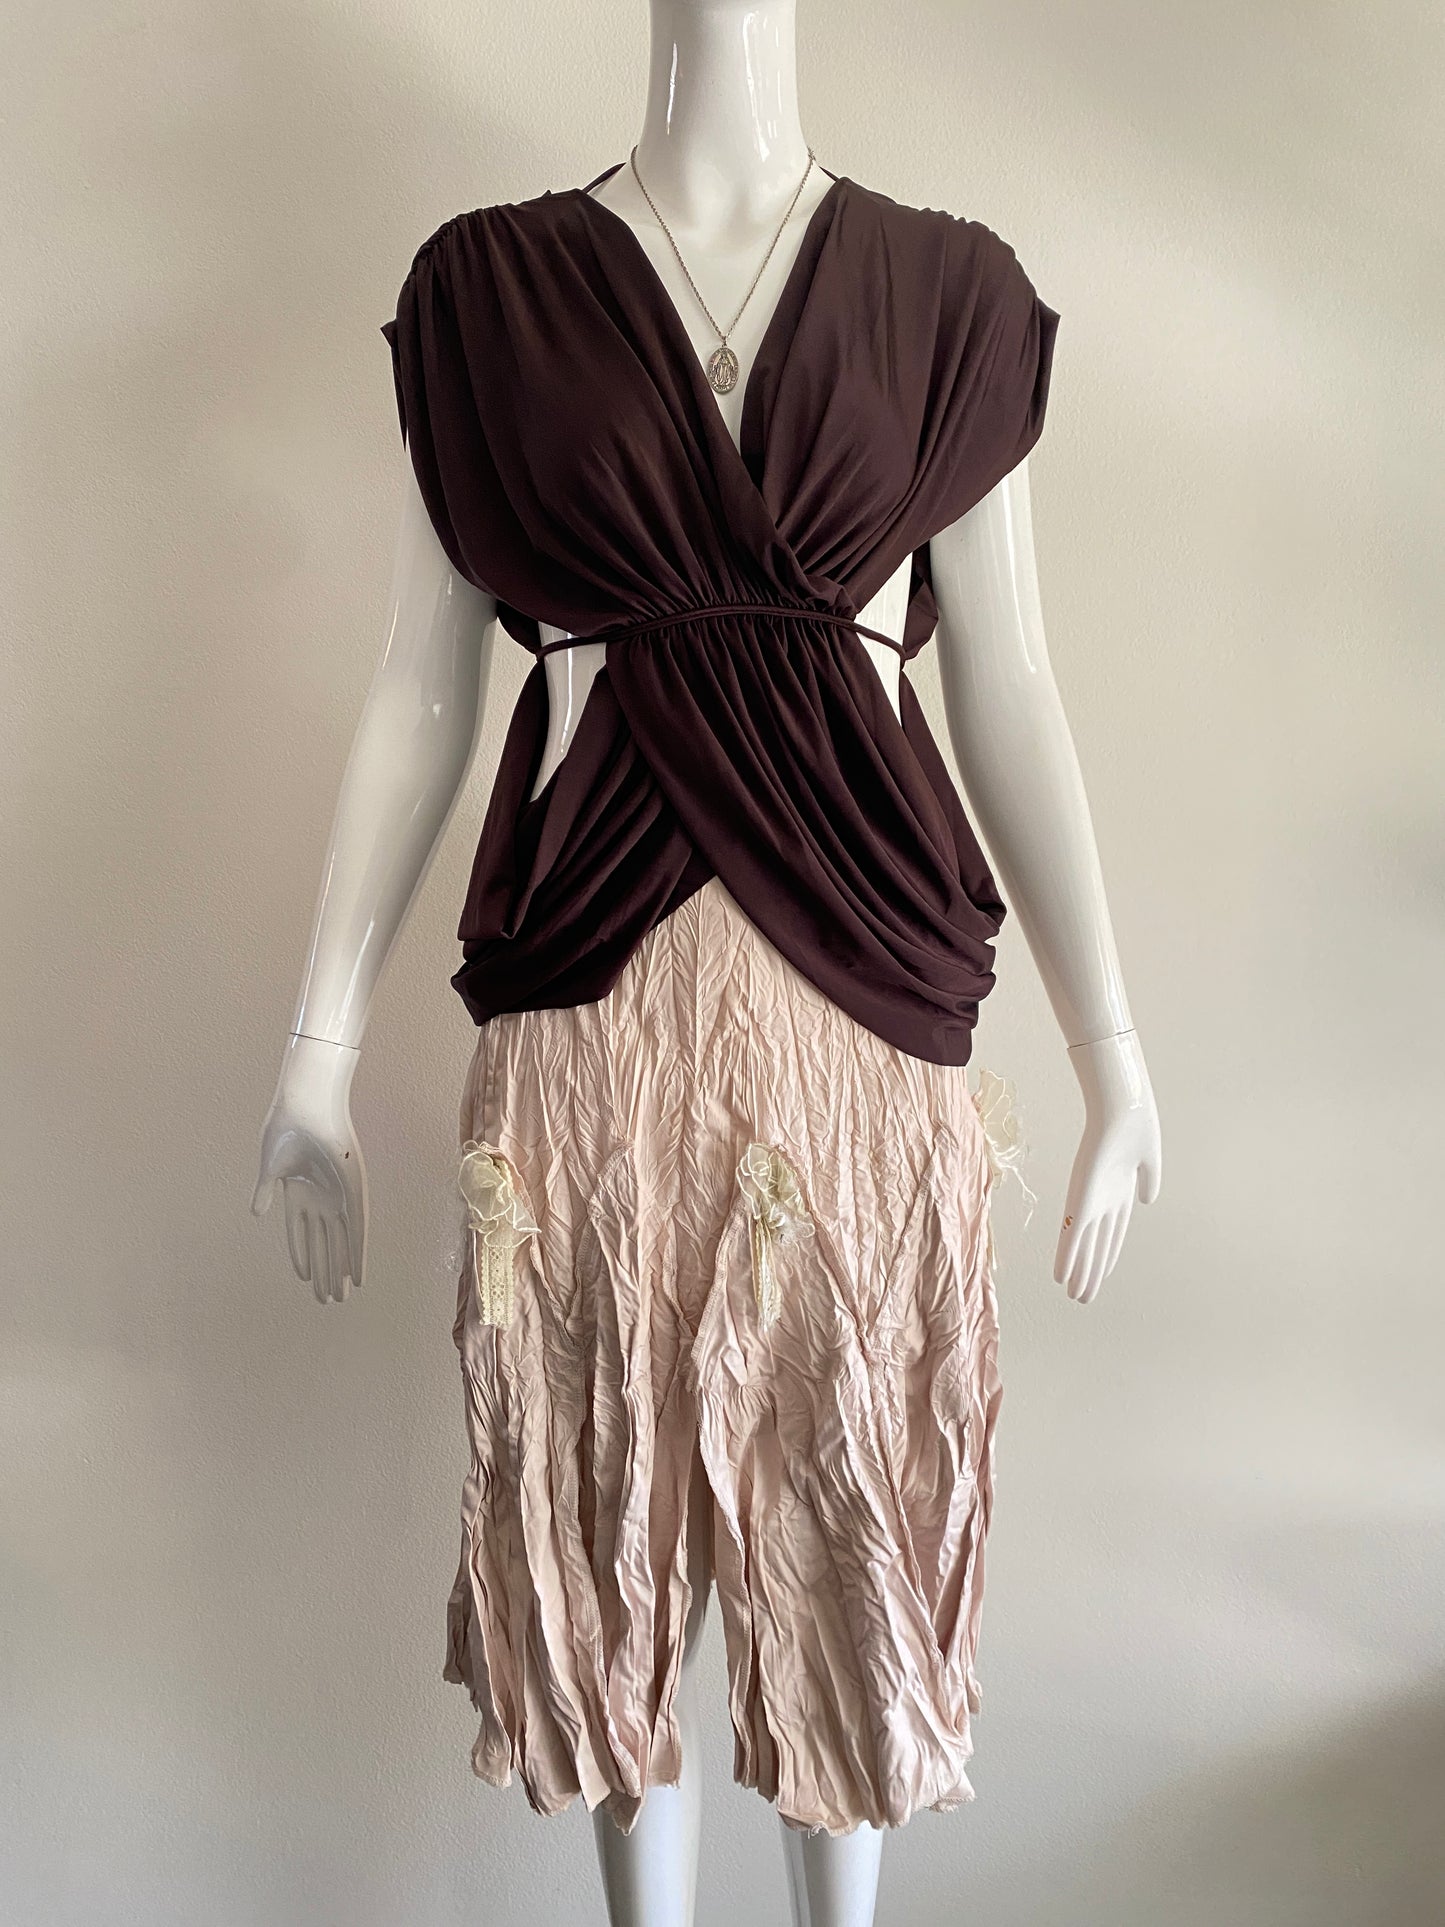 00's Chocolate Brown Abstract Top